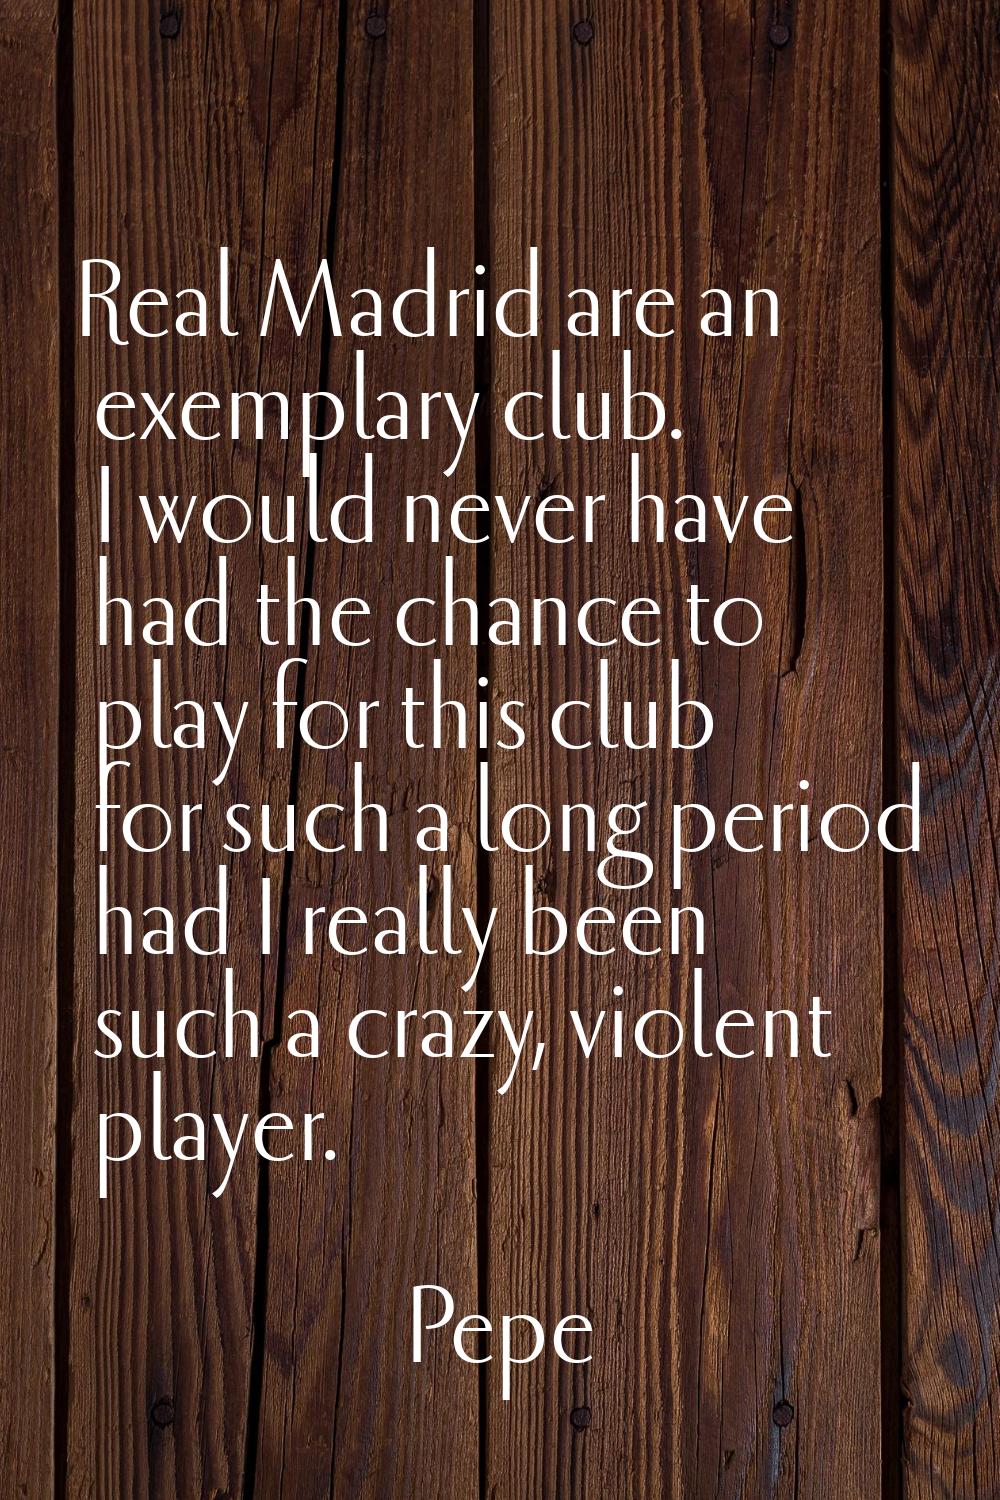 Real Madrid are an exemplary club. I would never have had the chance to play for this club for such